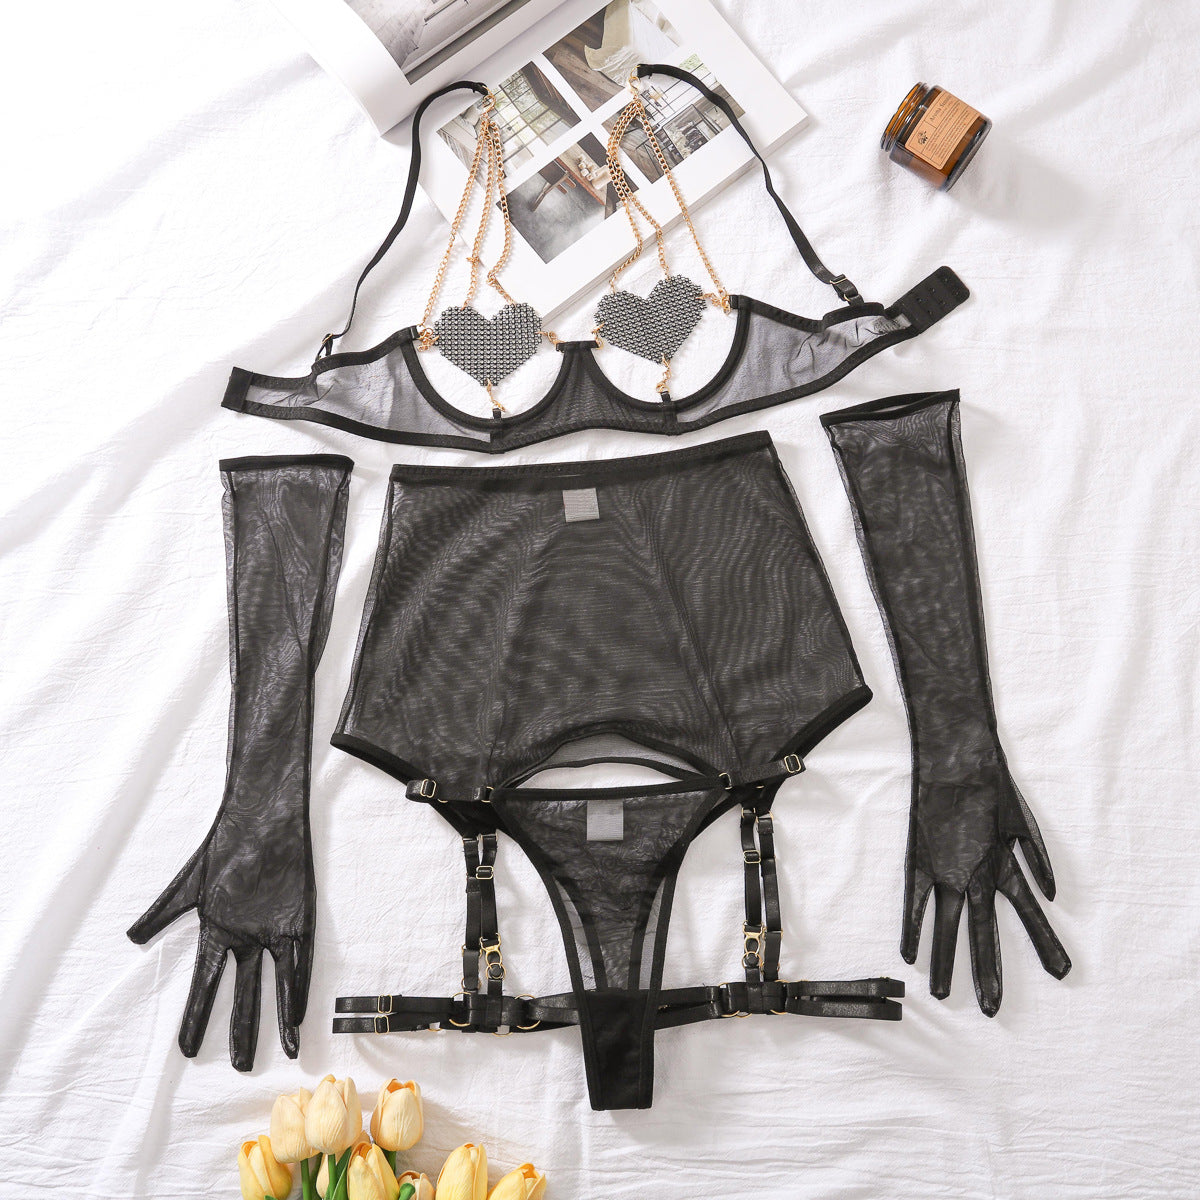 Find My Heart(s) On A Chain Lingerie Set w/ Gloves